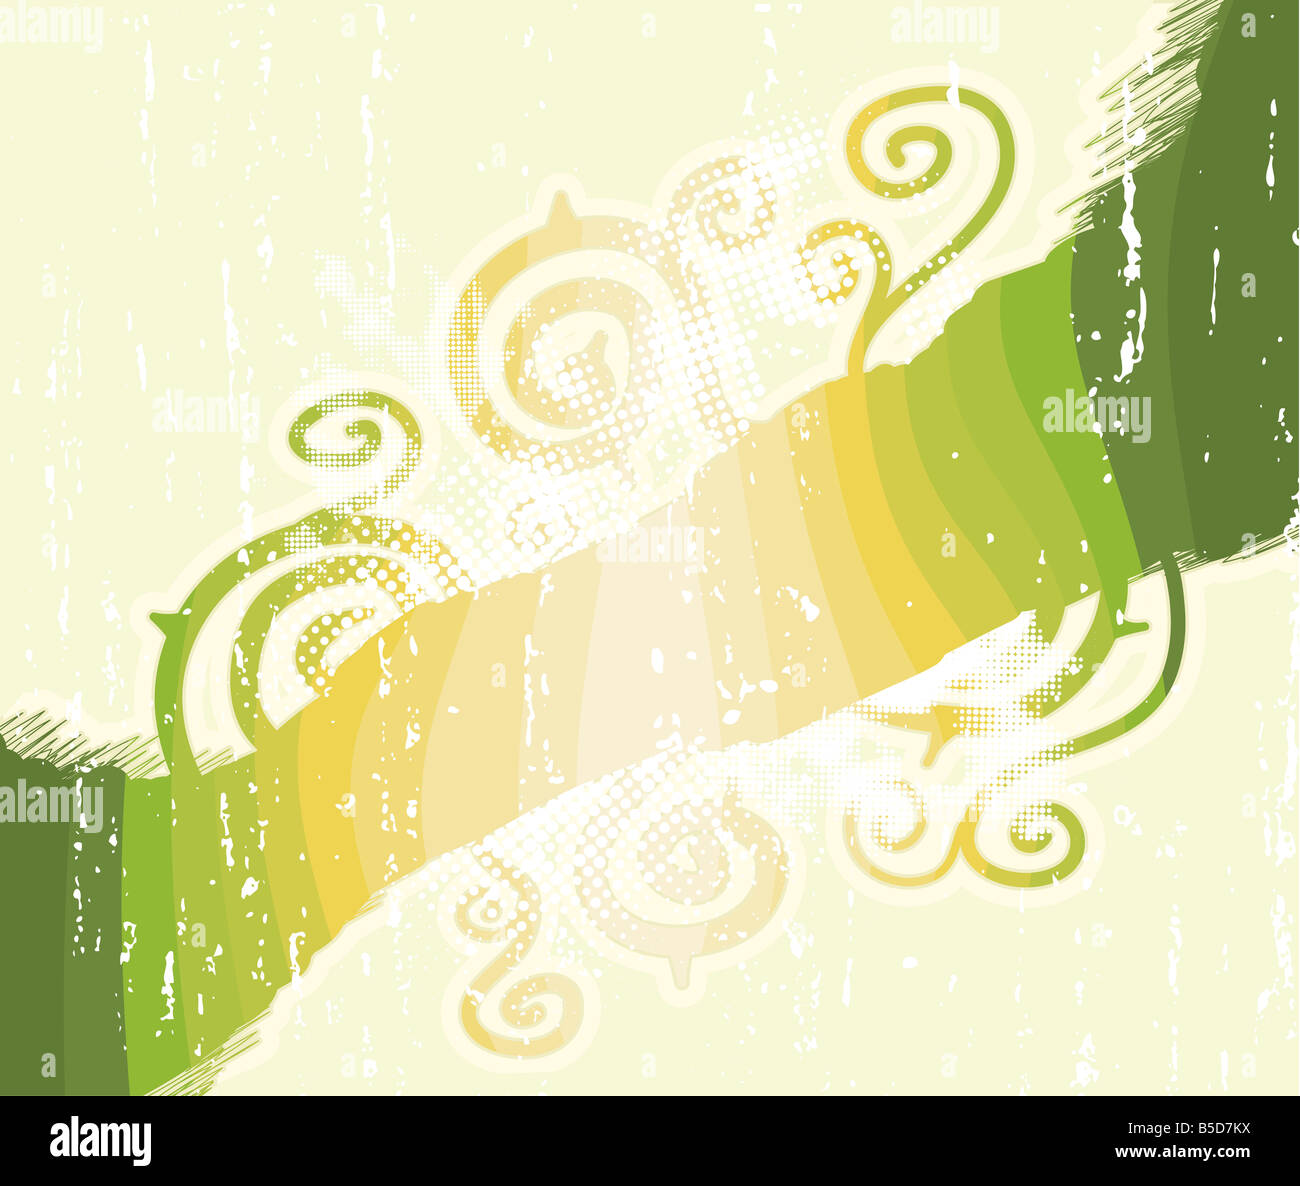 ector illustration of a grungy halftone childish spirals background Stock Photo